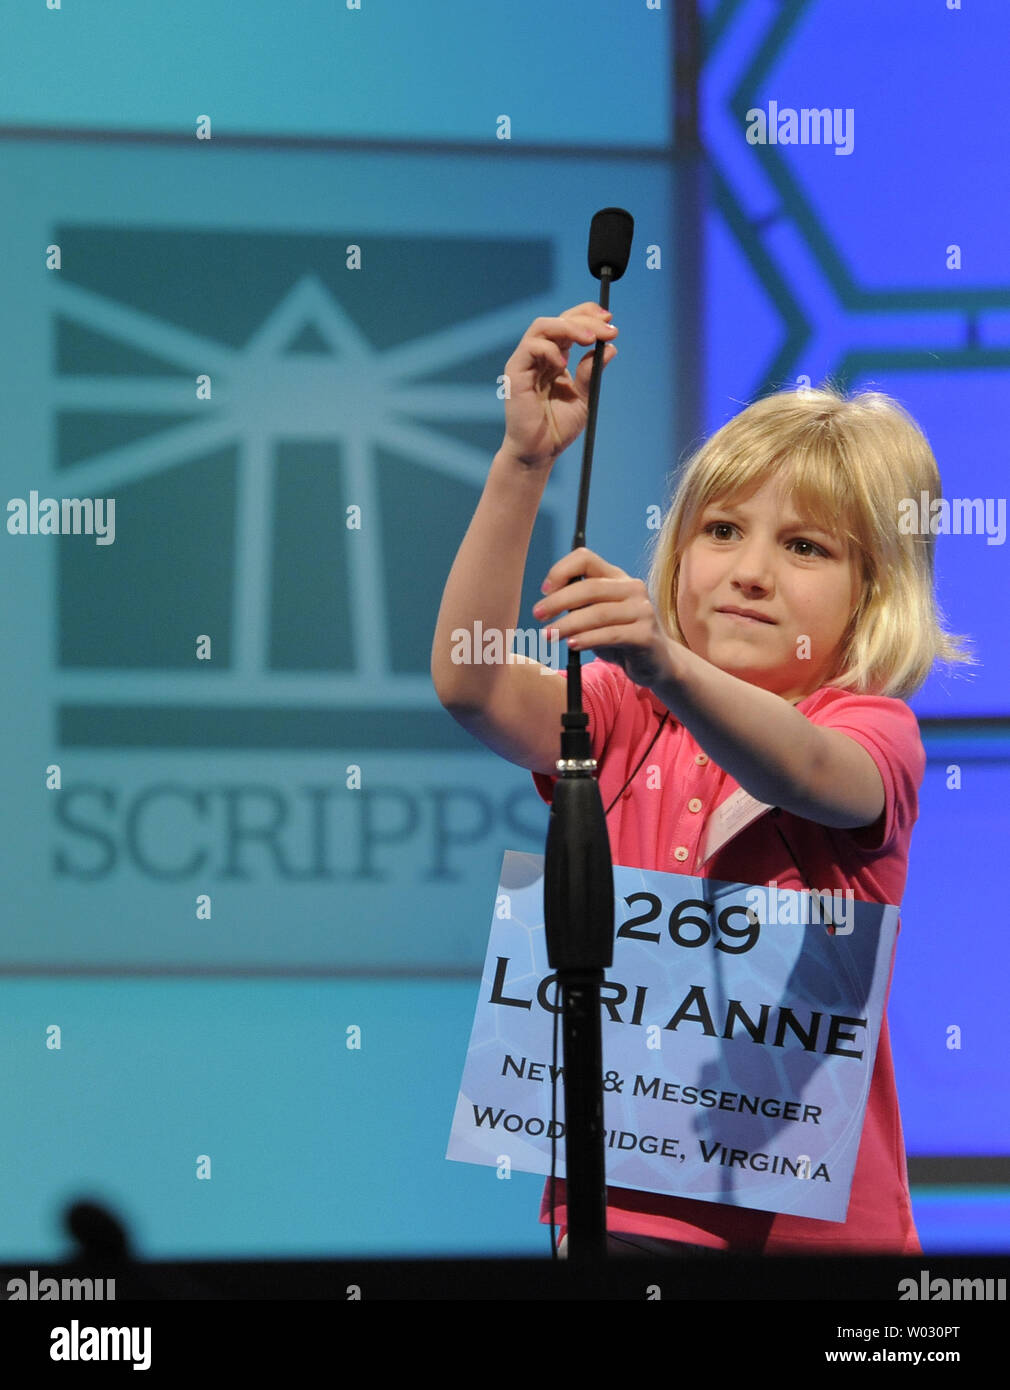 Lori Anne Madison, 6, of Woodbridge, Virginia, adjusts the microphone as he steps up to accept her first word, during opening round of the Scripps National Spelling Bee, May 30, 2012, in National Harbor, Maryland. Madison, the youngest known qualifier in the history of the contest, correctly spelled the word 'dirigible', a lighter-than-air aircraft, to advance.        UPI/Mike Theiler Stock Photo